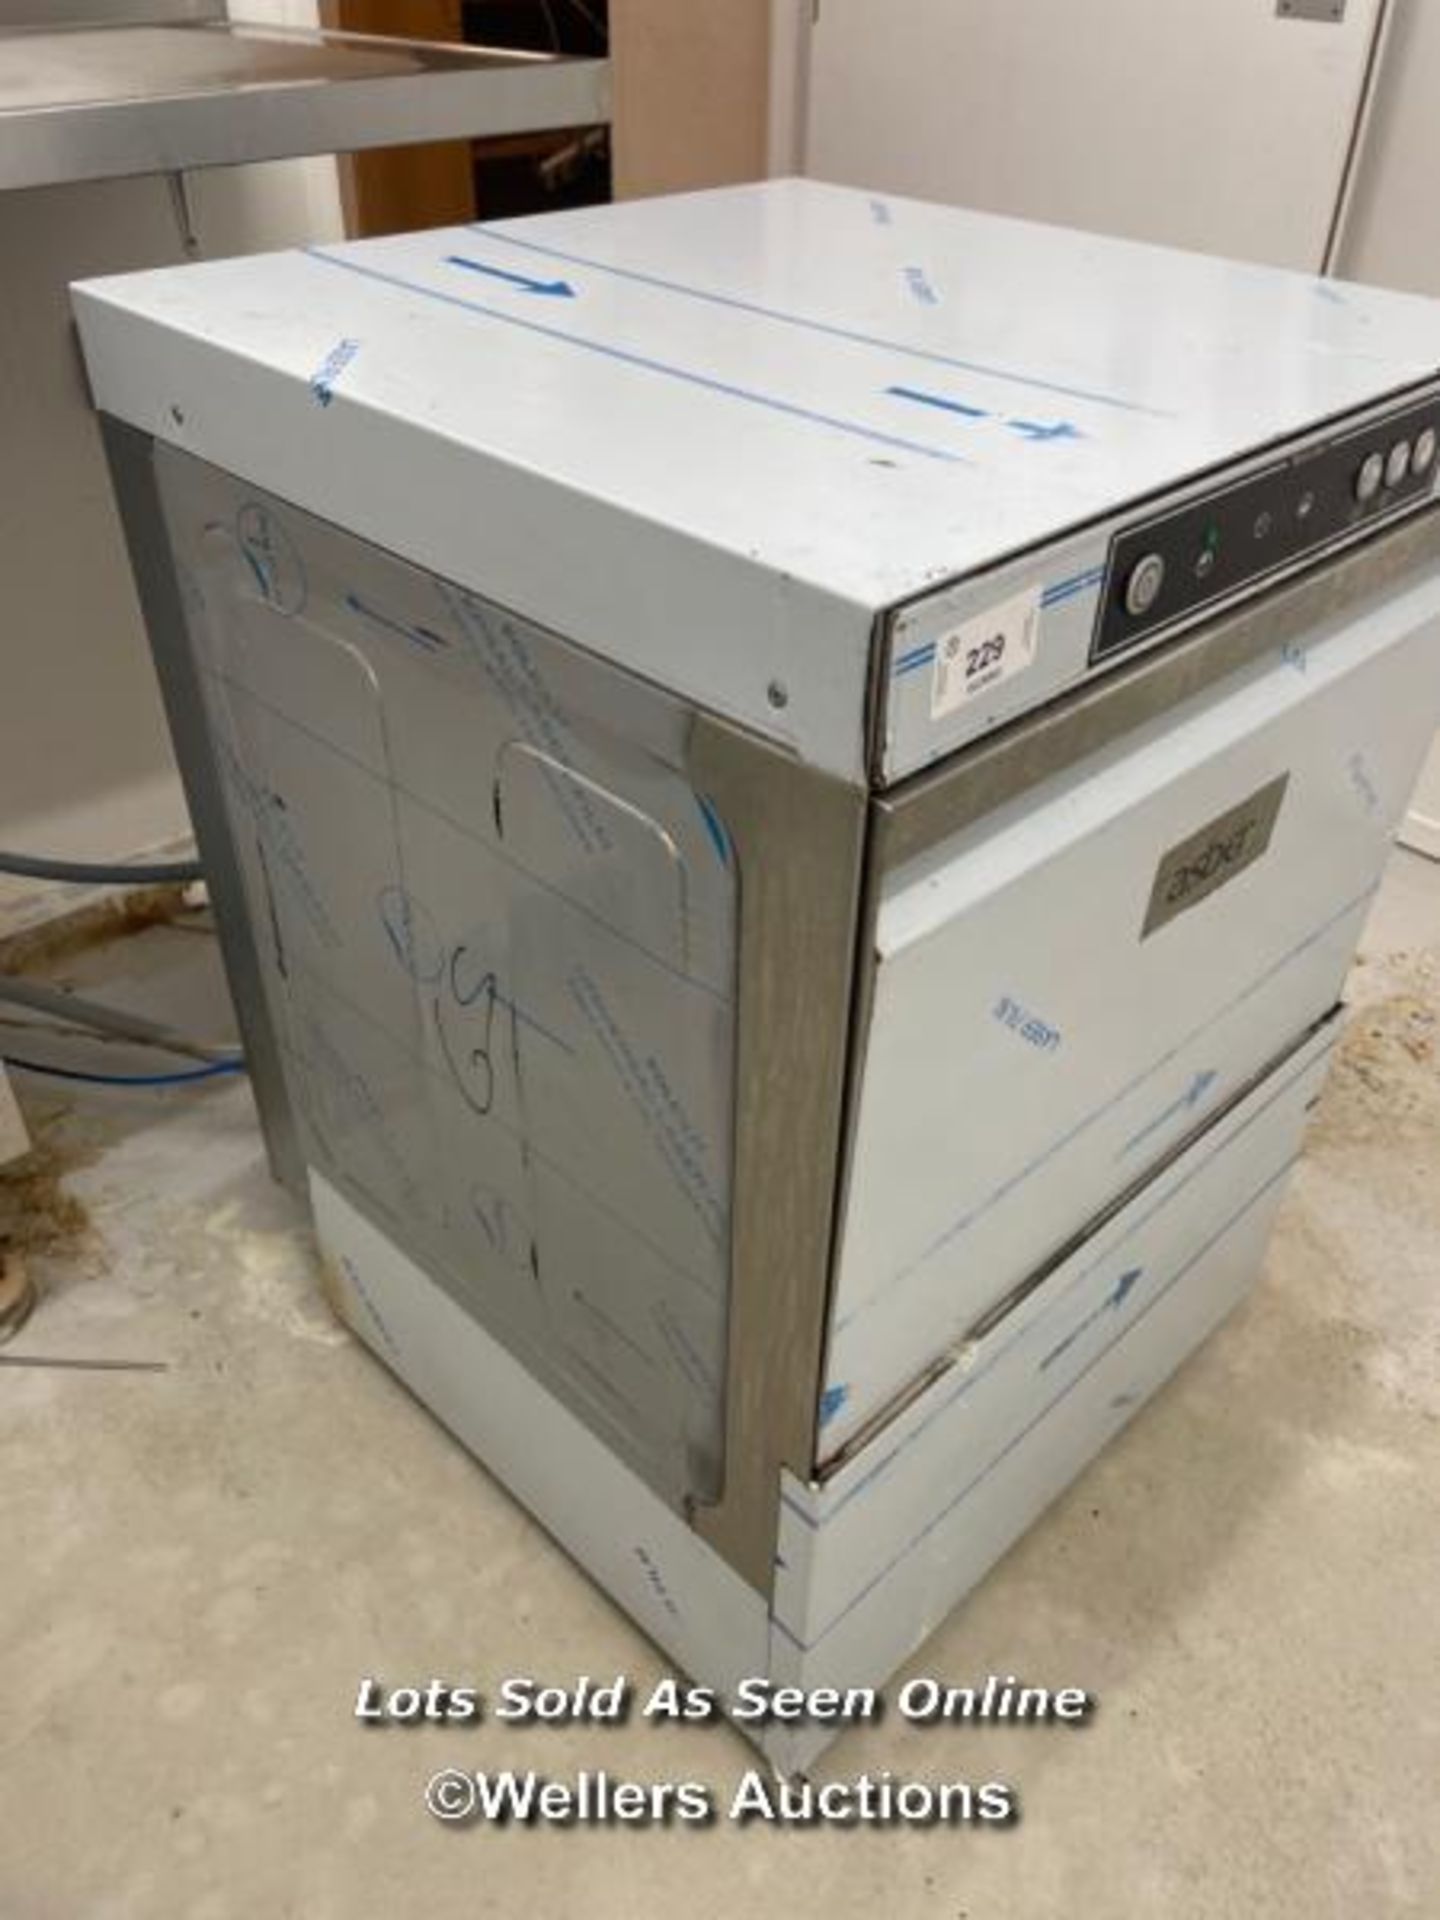 ASBER TECH LINE COMMERCIAL DISHWASHER (MODEL UNKNOWN), 82CM (H) X 60CM (W) X 60CM (D) / COLLECTION - Image 2 of 3